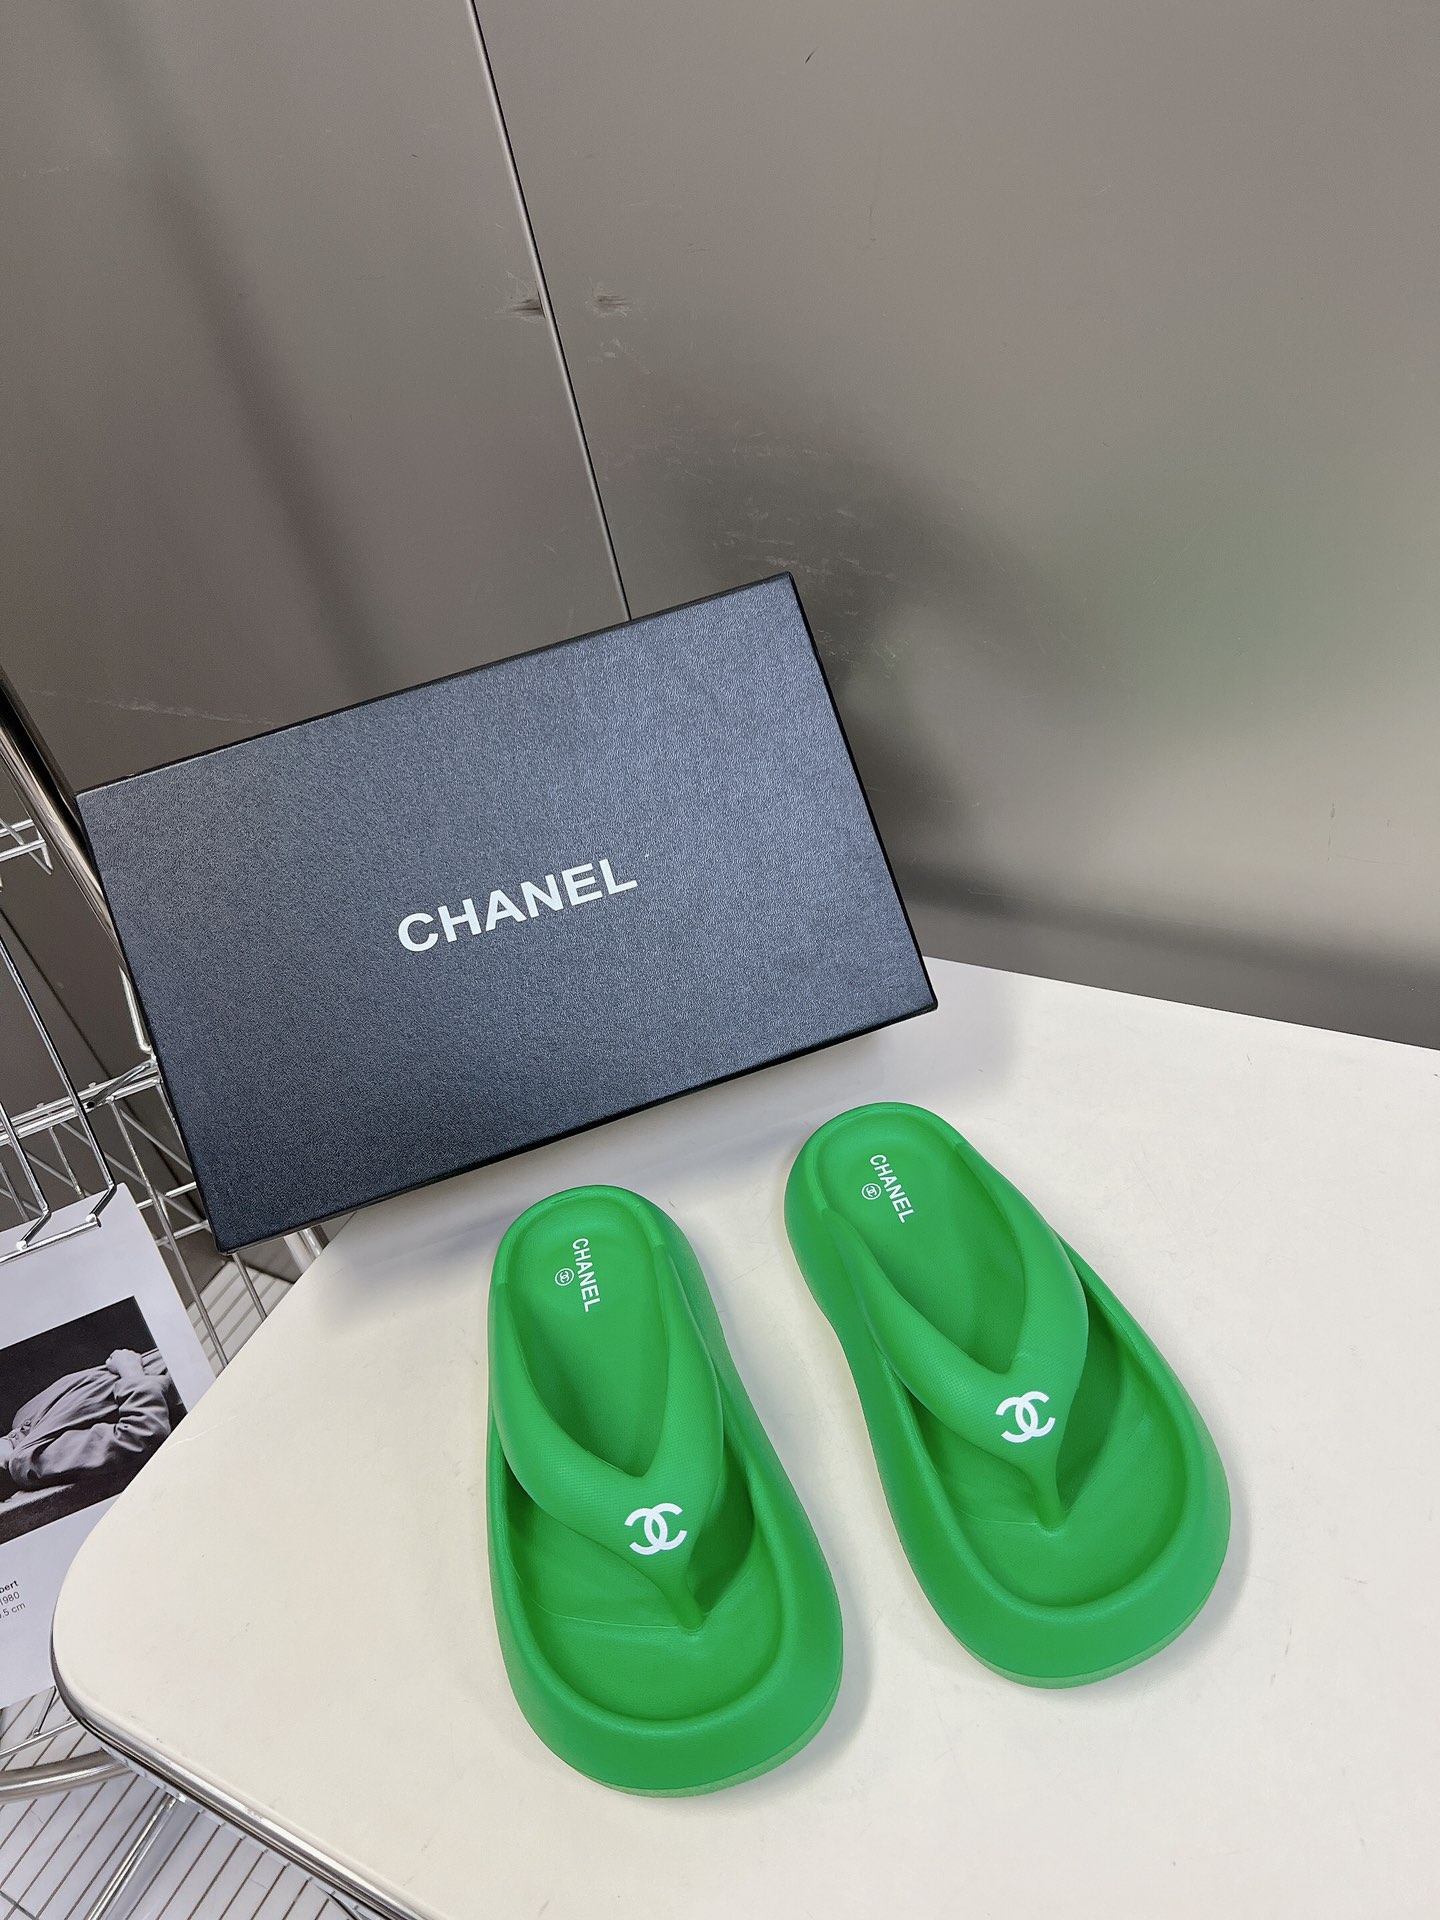 Chanel Shoes Flip Flops Slippers Black Spring/Summer Collection Fashion